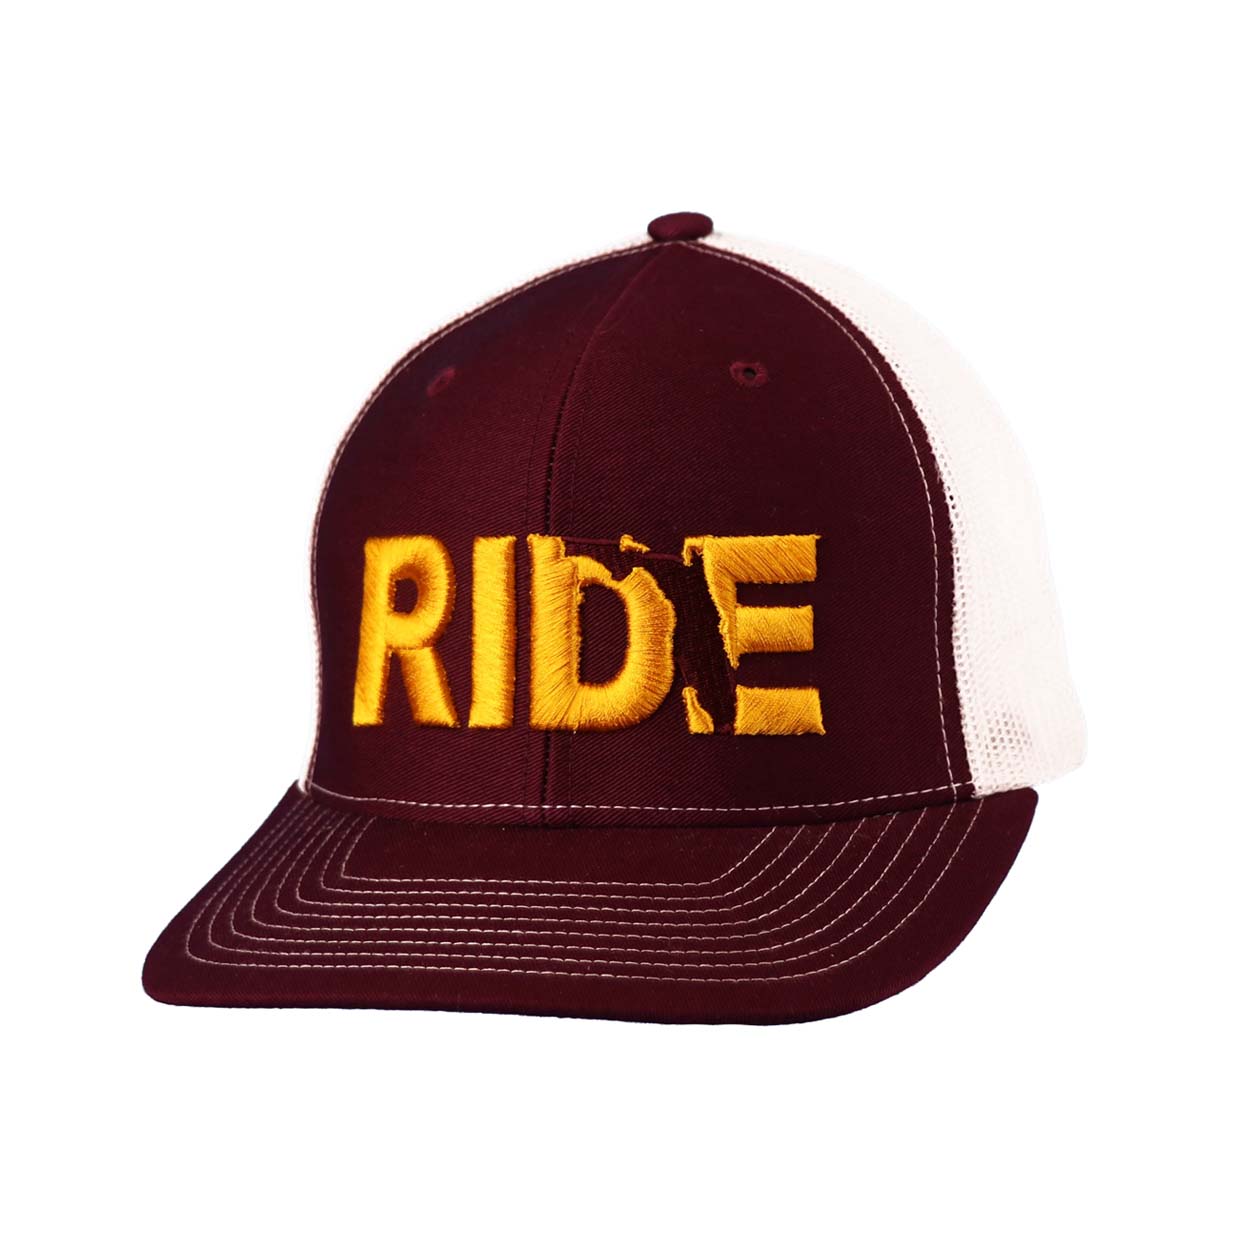 Ride Florida Classic Pro 3D Puff Embroidered Snapback Trucker Hat Maroon/Gold